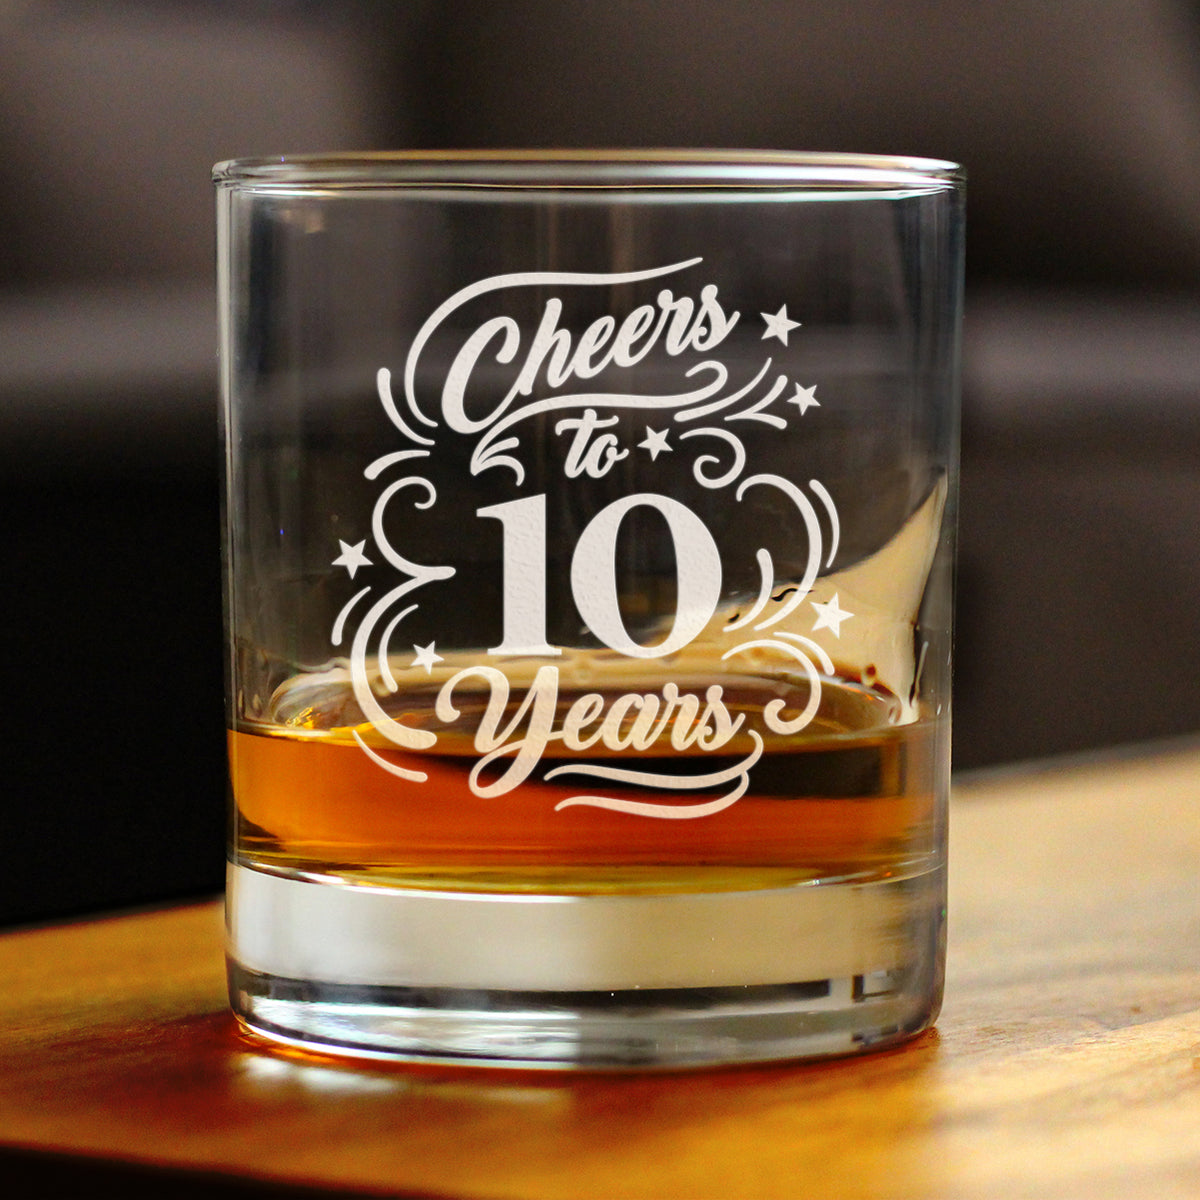 Cheers to 10 Years - Whiskey Rocks Glass Gifts for Women &amp; Men - 10th Anniversary Party Decor - 10.25 Oz Glass